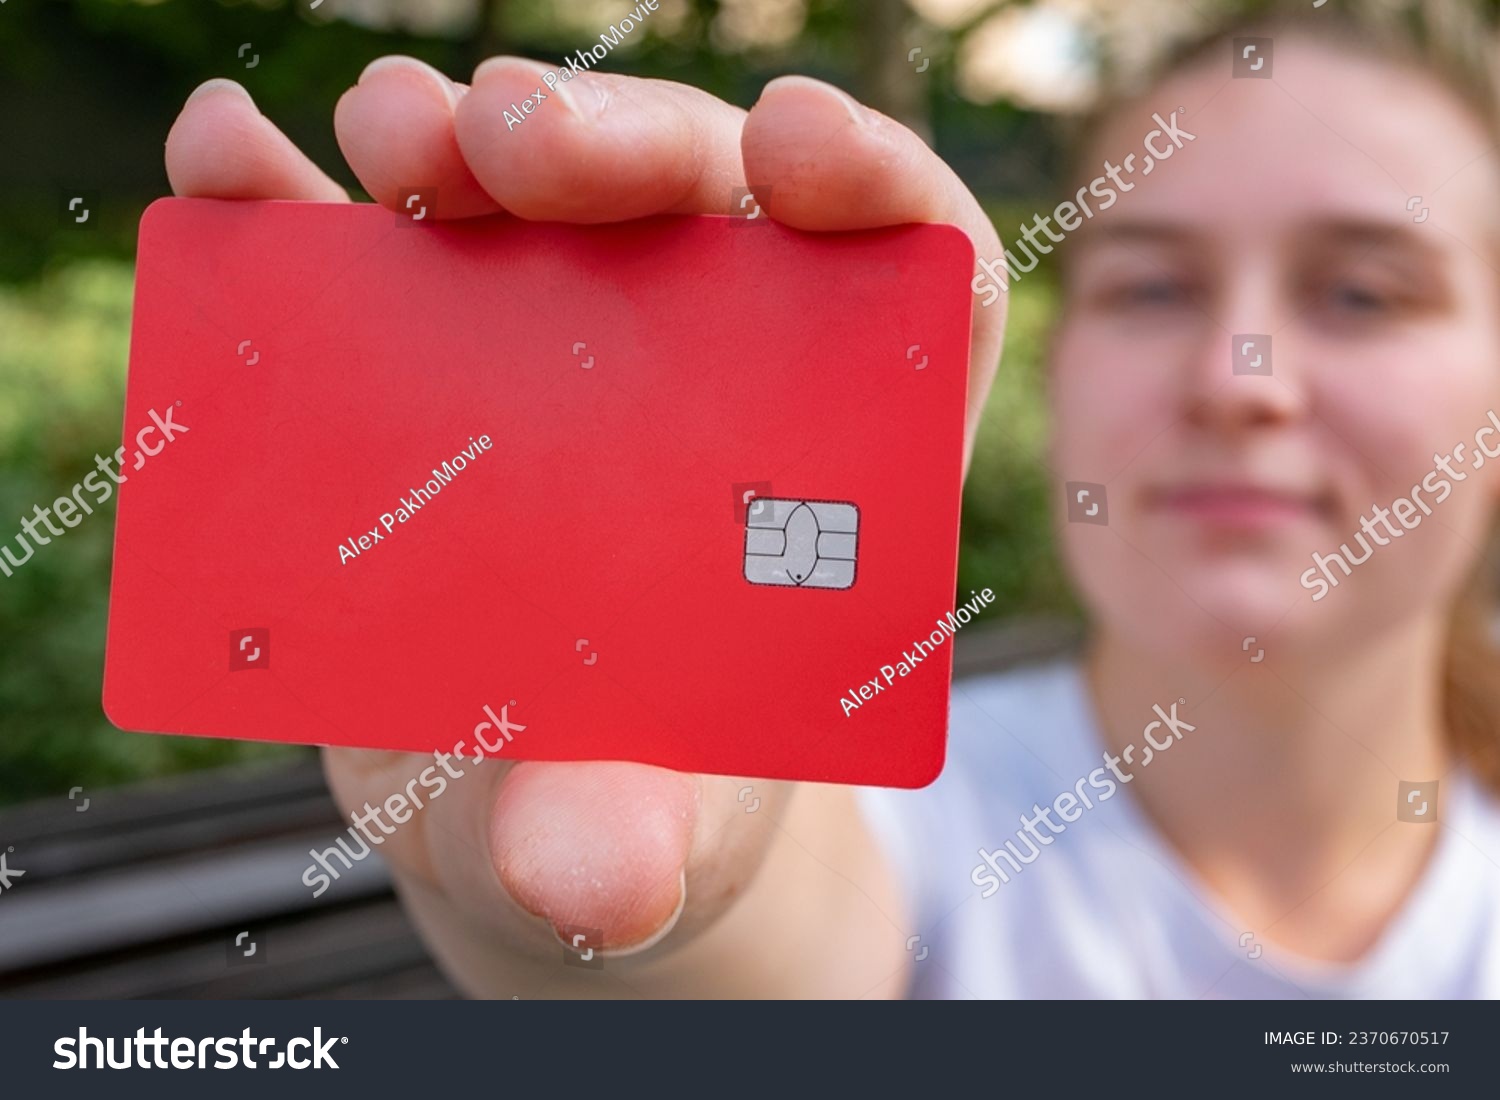 A girl on the street is holding a red credit card with no writing on it. A close-up of a red bank card in her hand. Bank card chip.  #2370670517